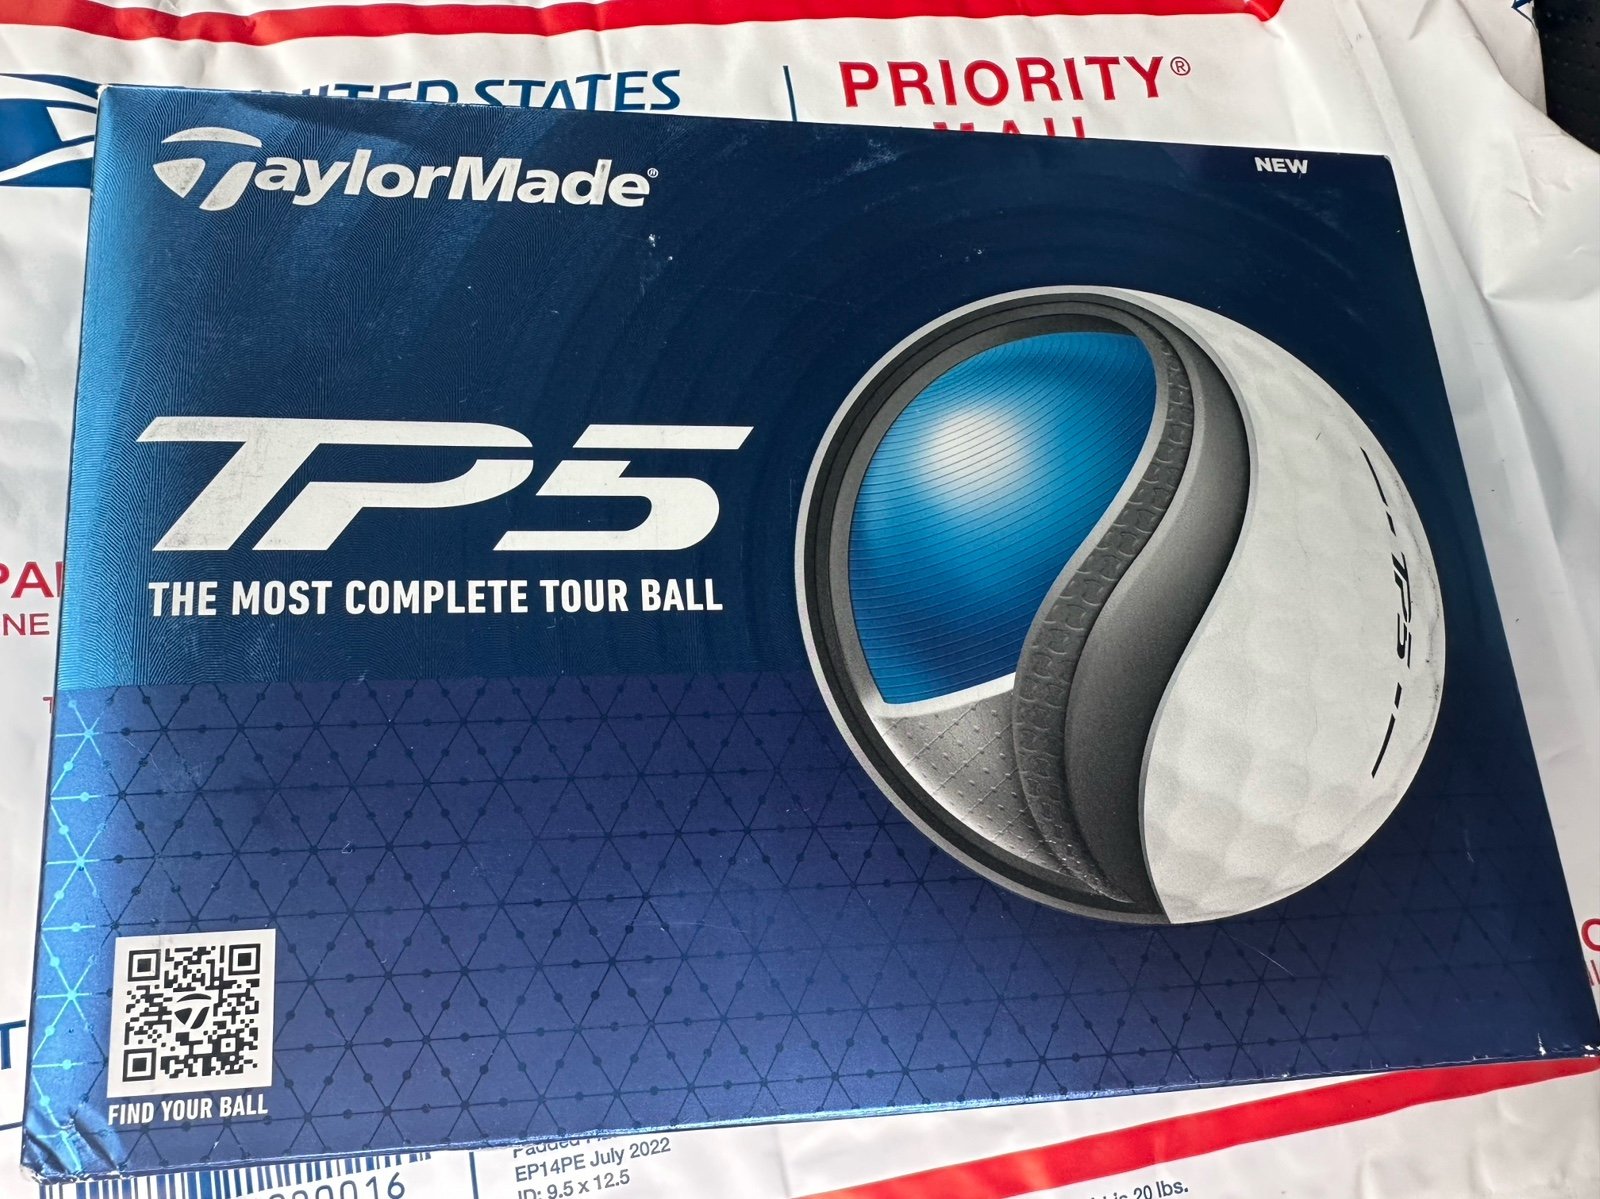 2 Dozen NEW TaylorMade TP5 Golf Balls Posted Price ONLY 76FpTpCDh